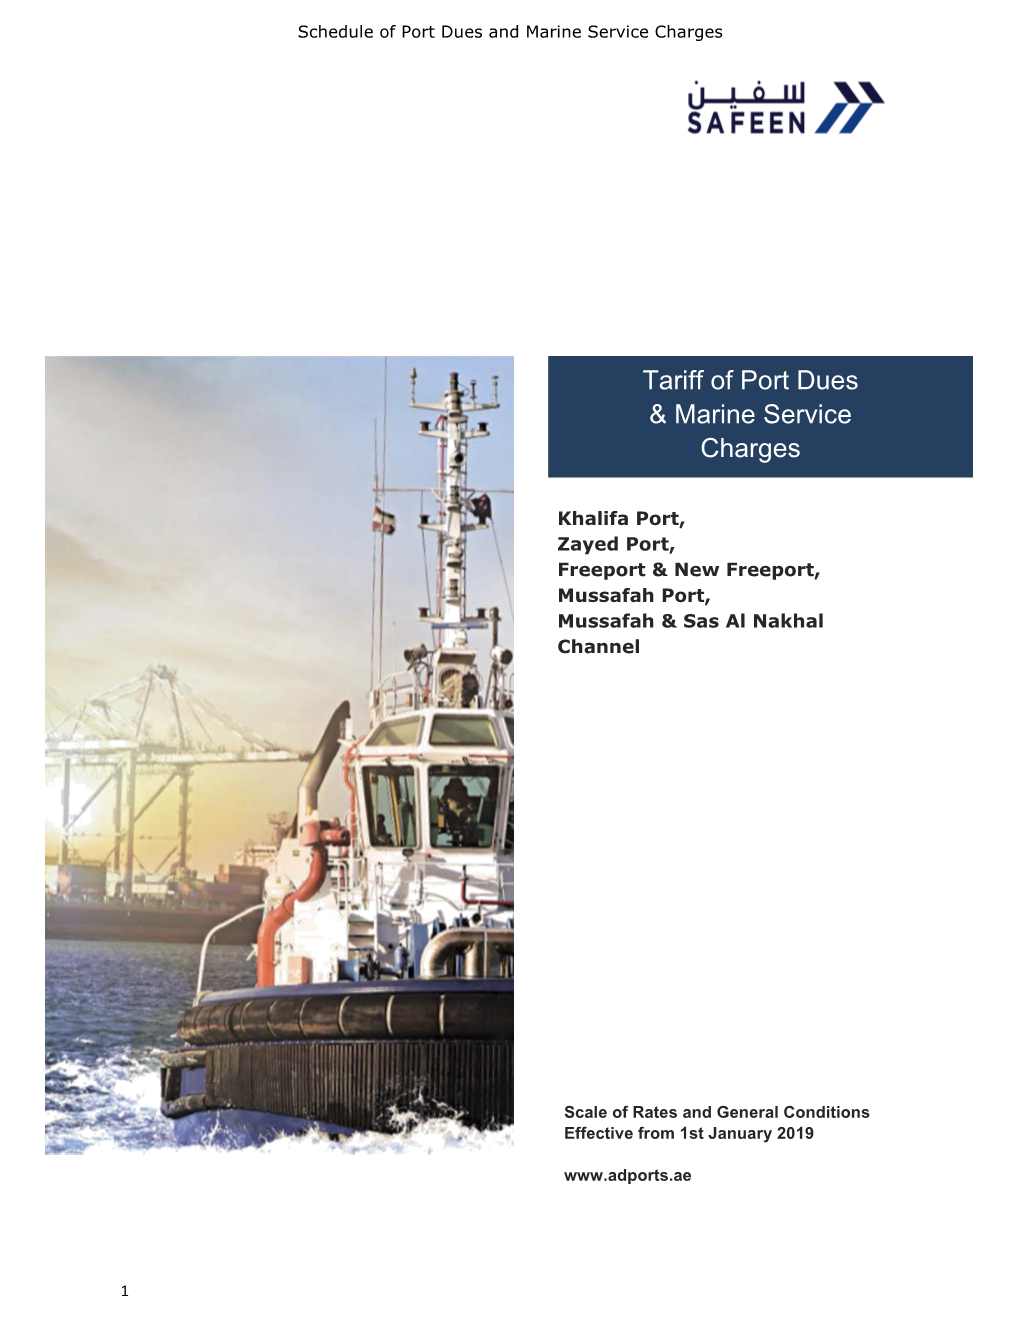 Tariff of Port Dues & Marine Service Charges